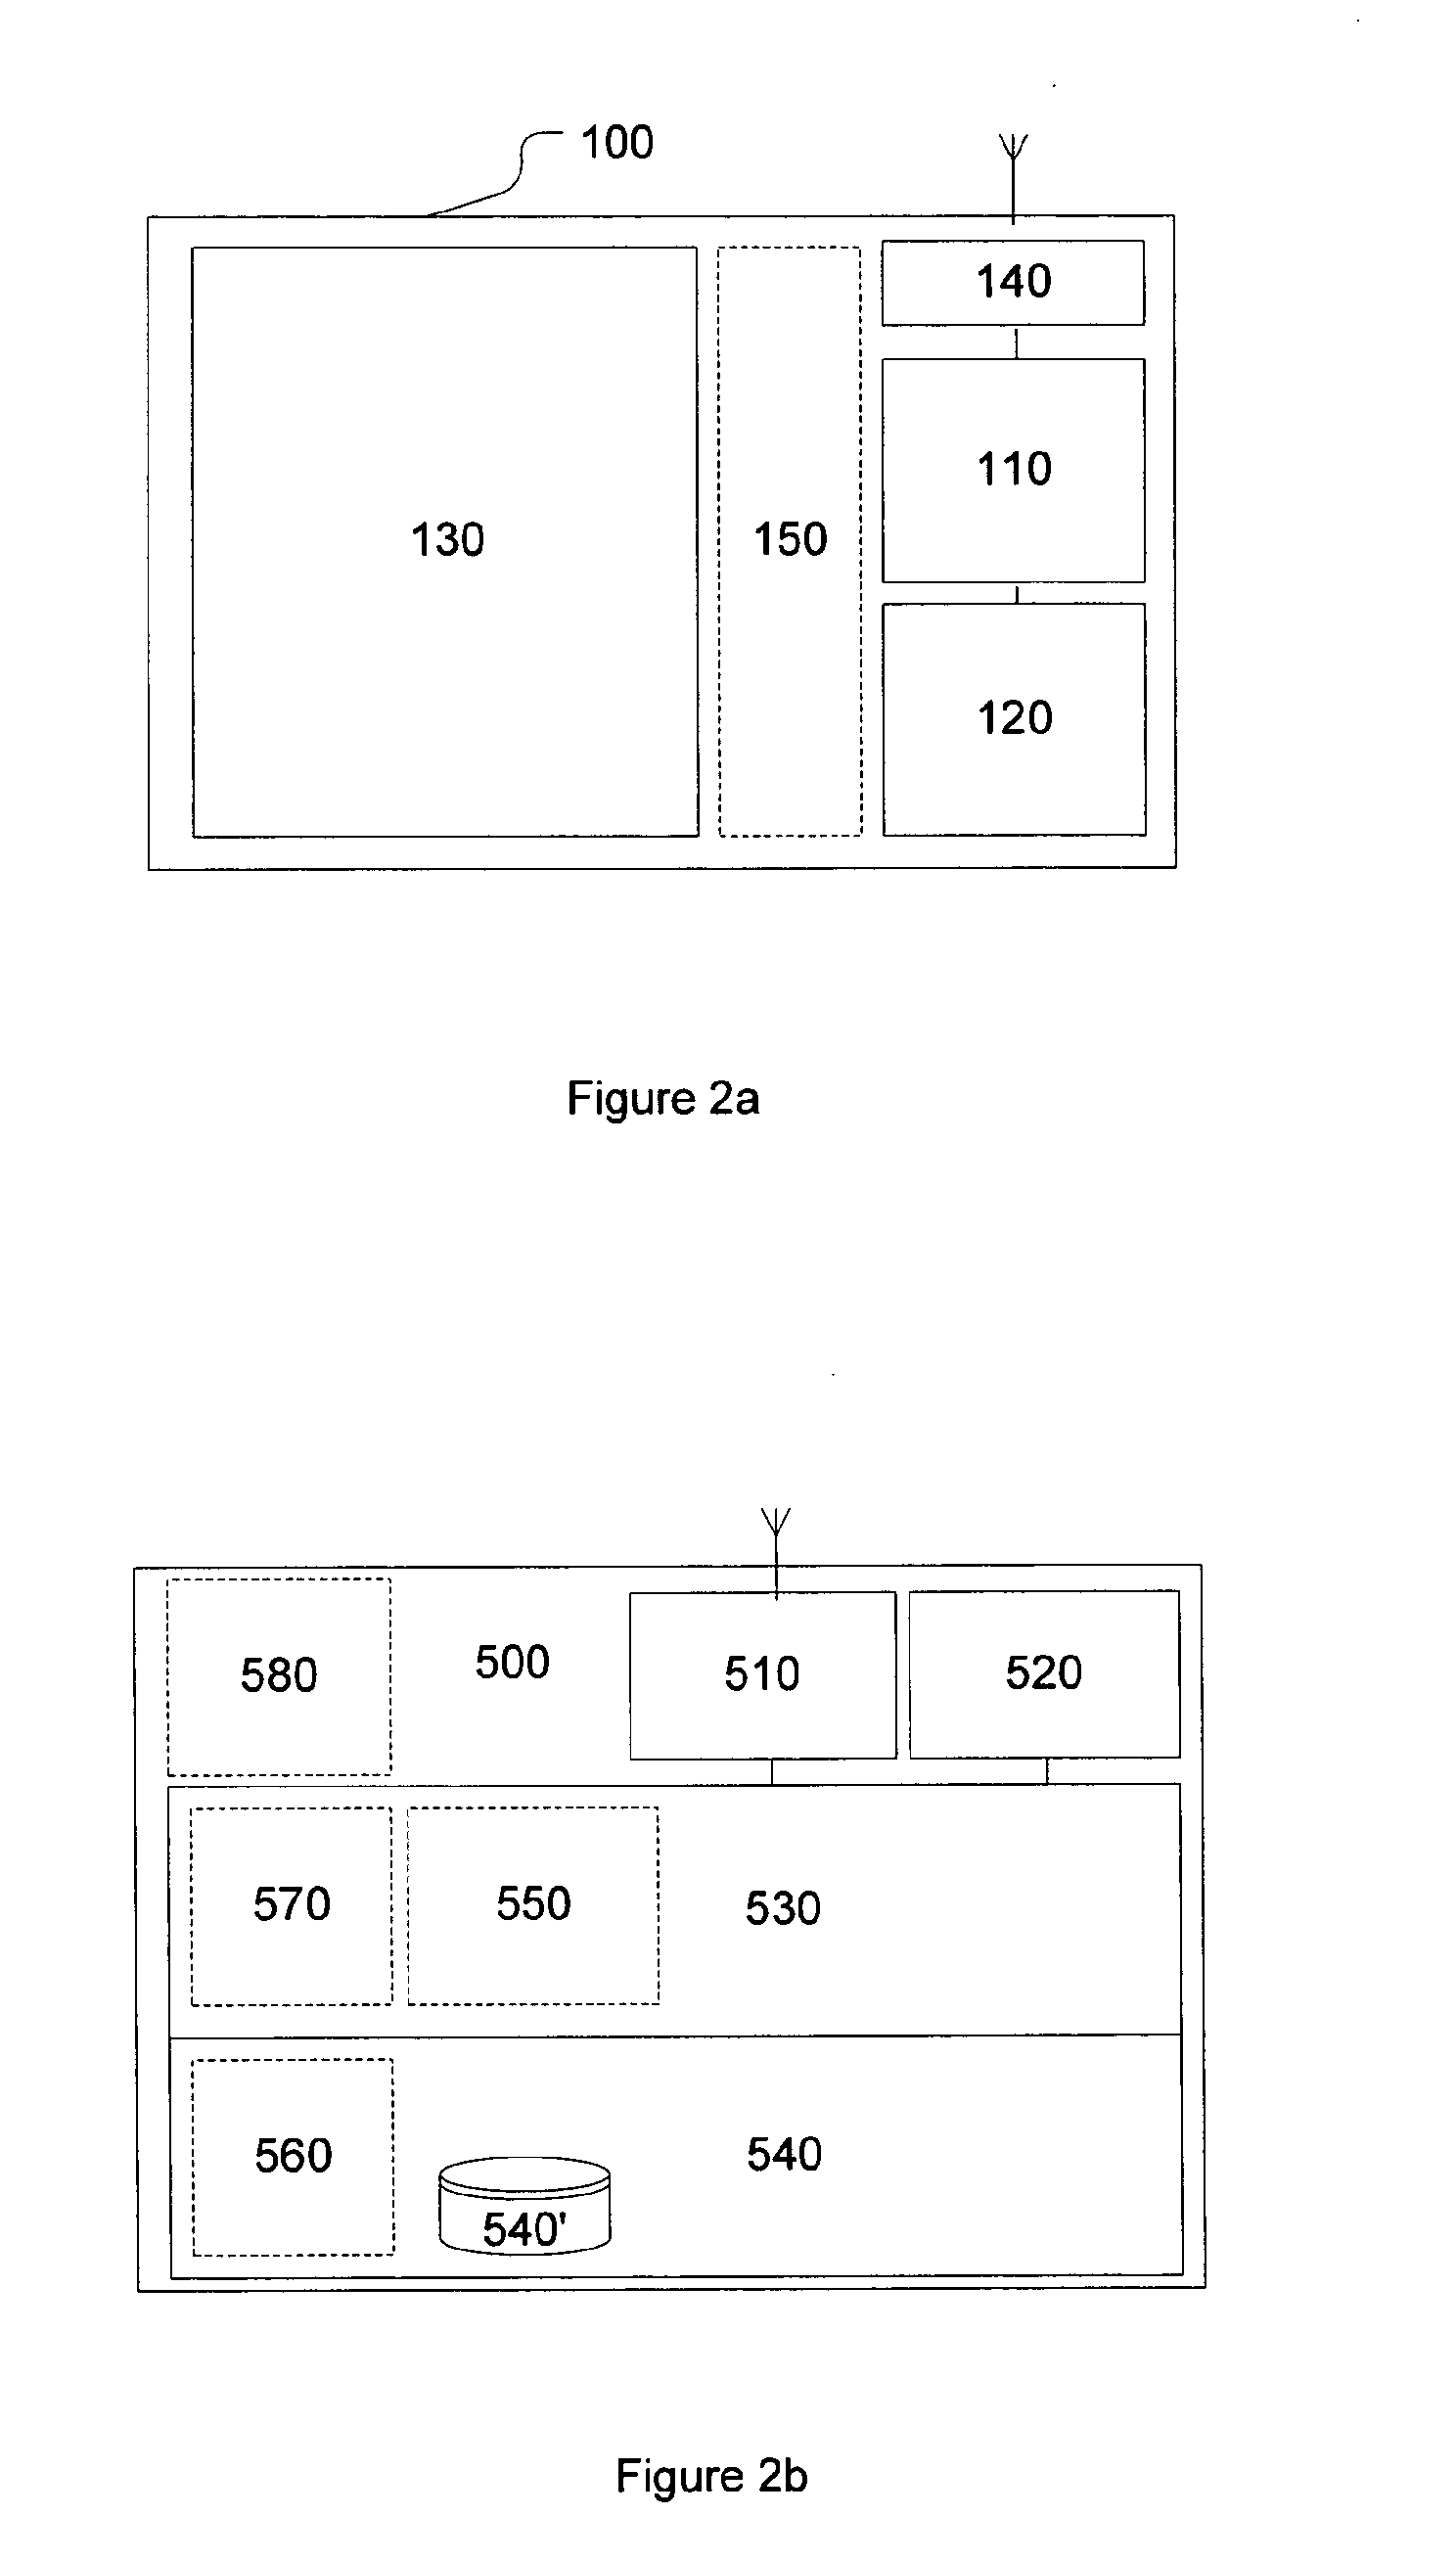 Method for Content Folding